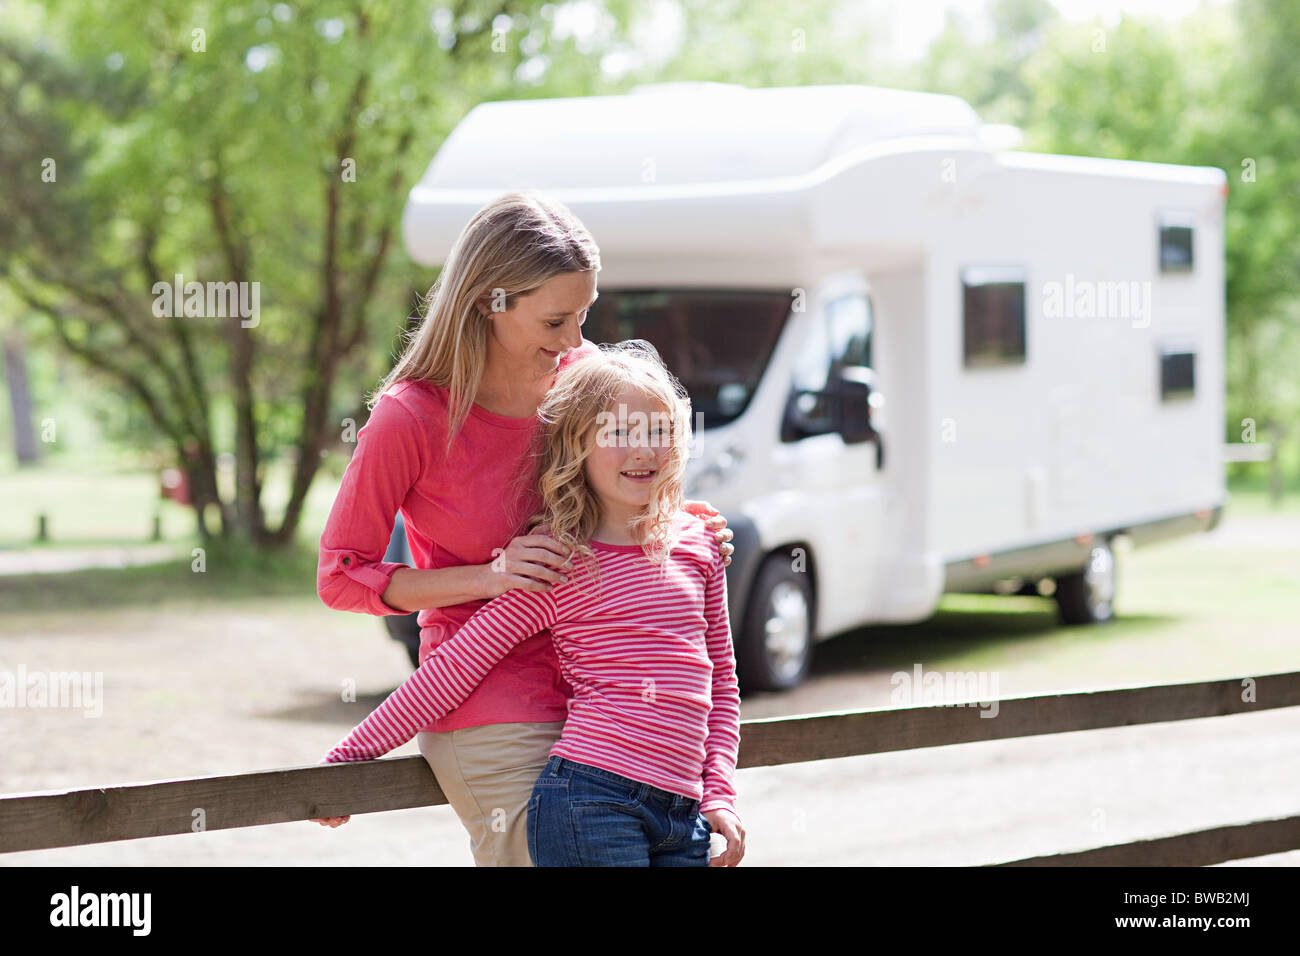 Mother and daughter on caravan holiday Stock Photo